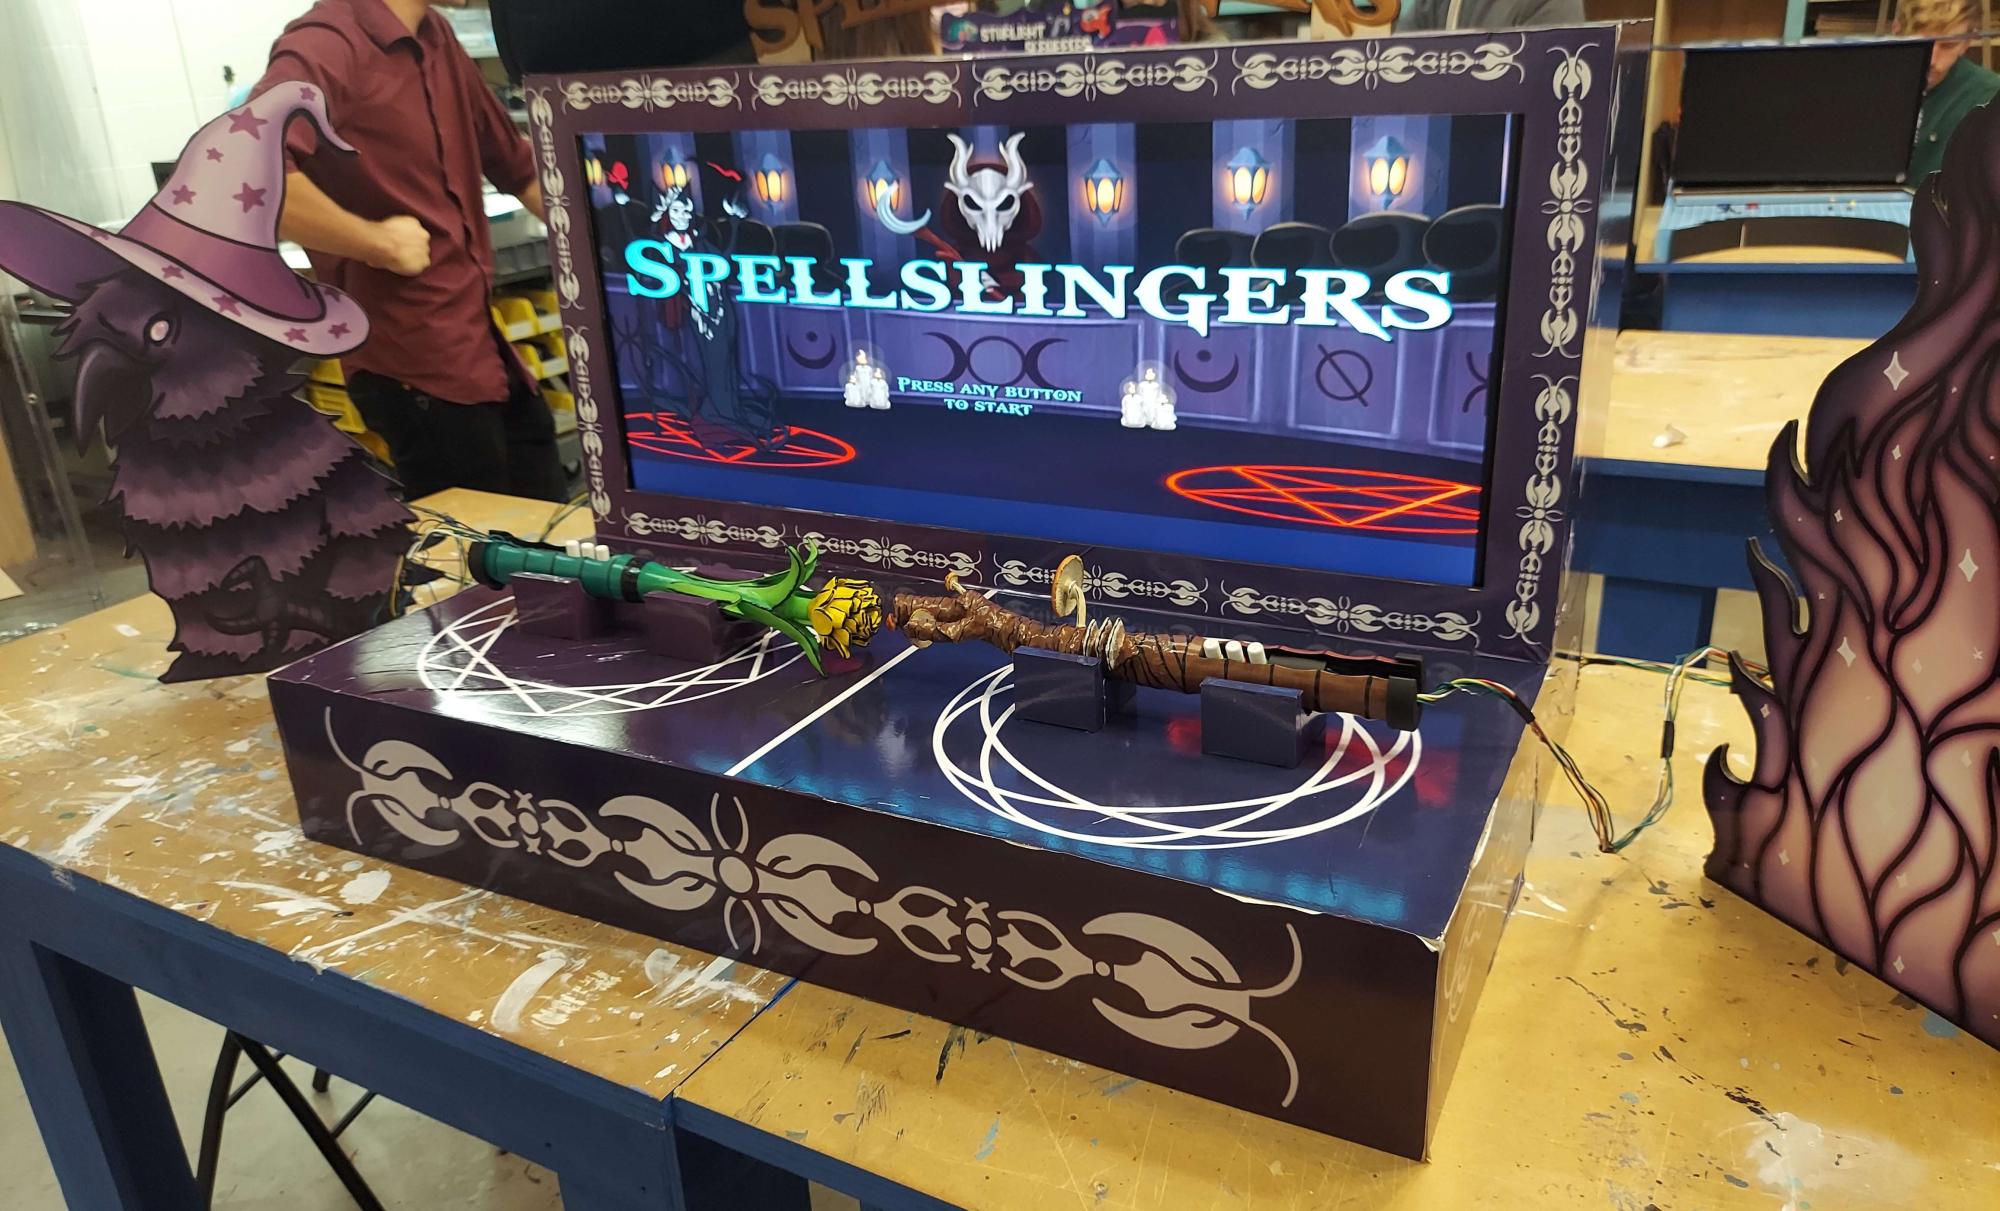 Spellslingers Video Game Cabinet with Screen On